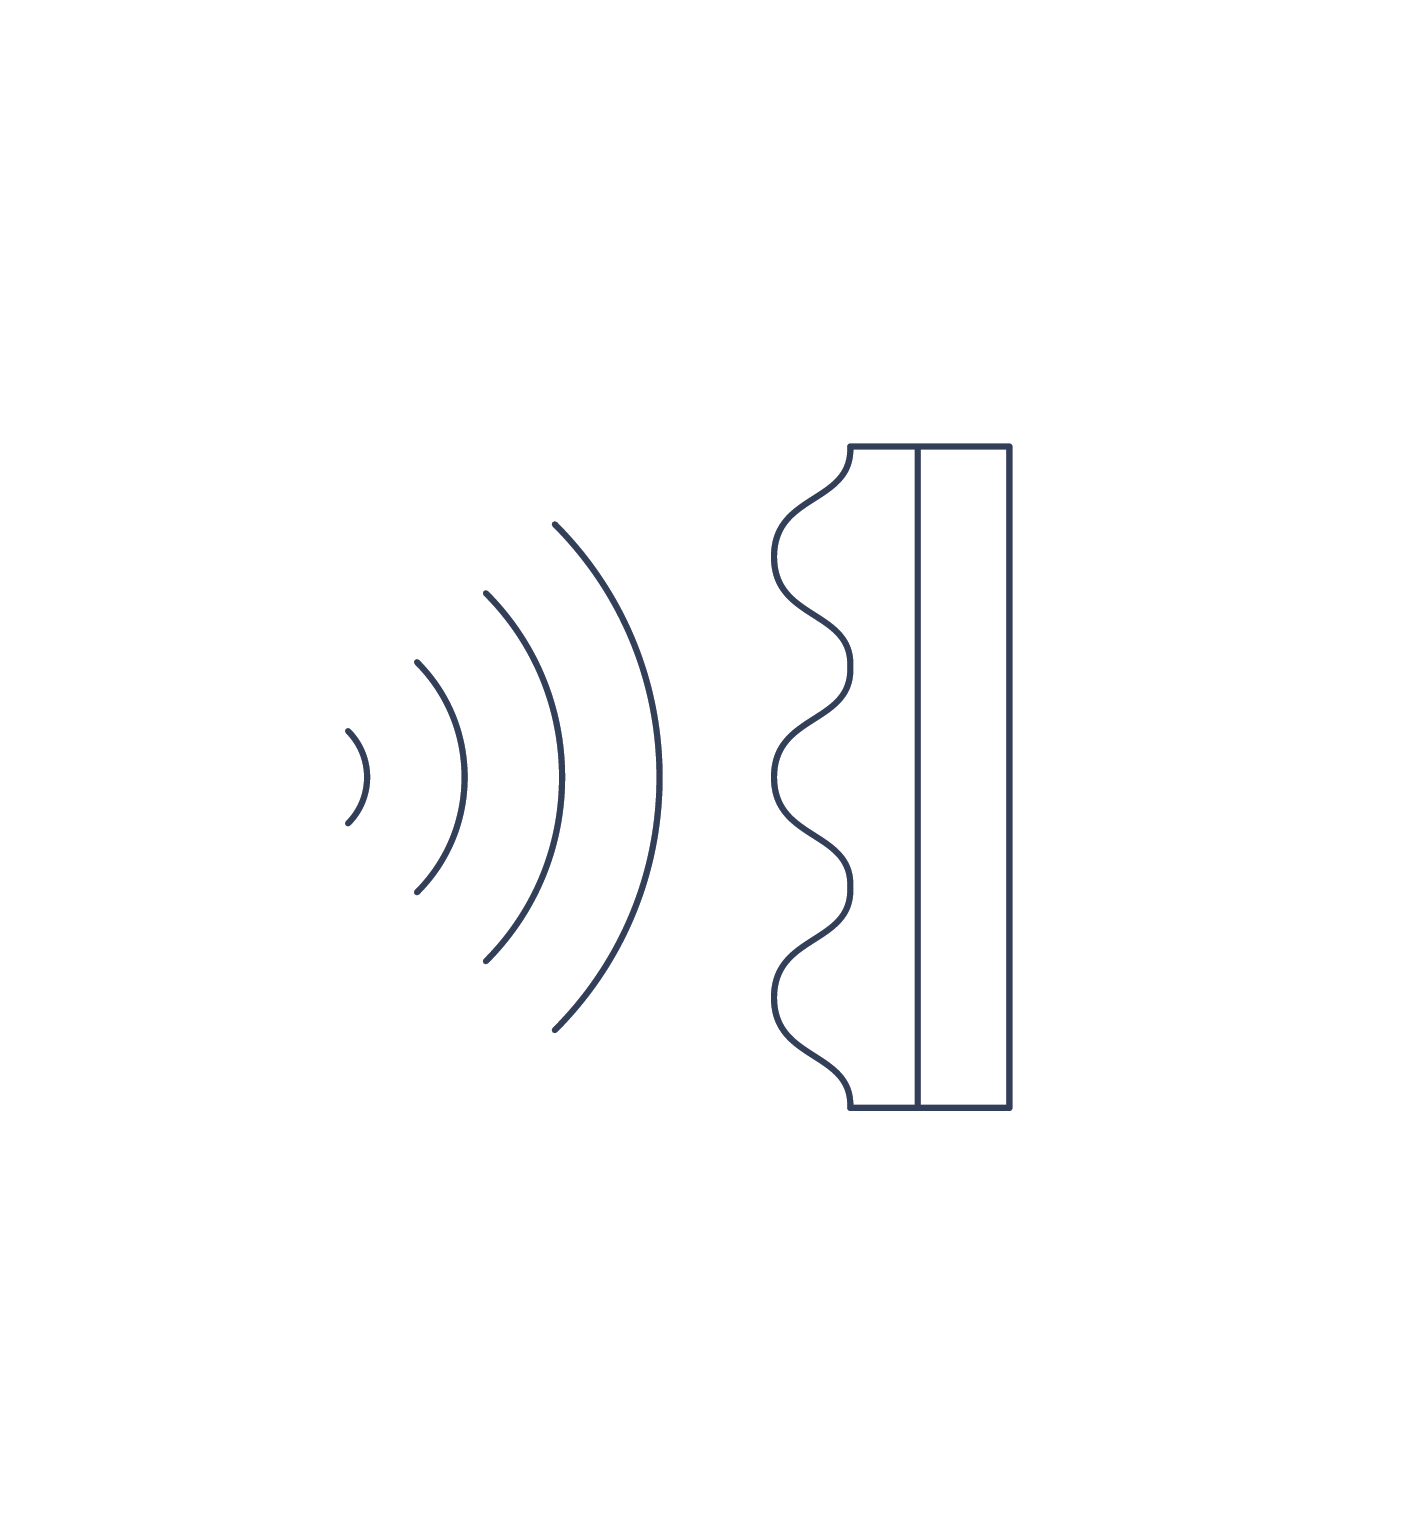 soundproof_icon